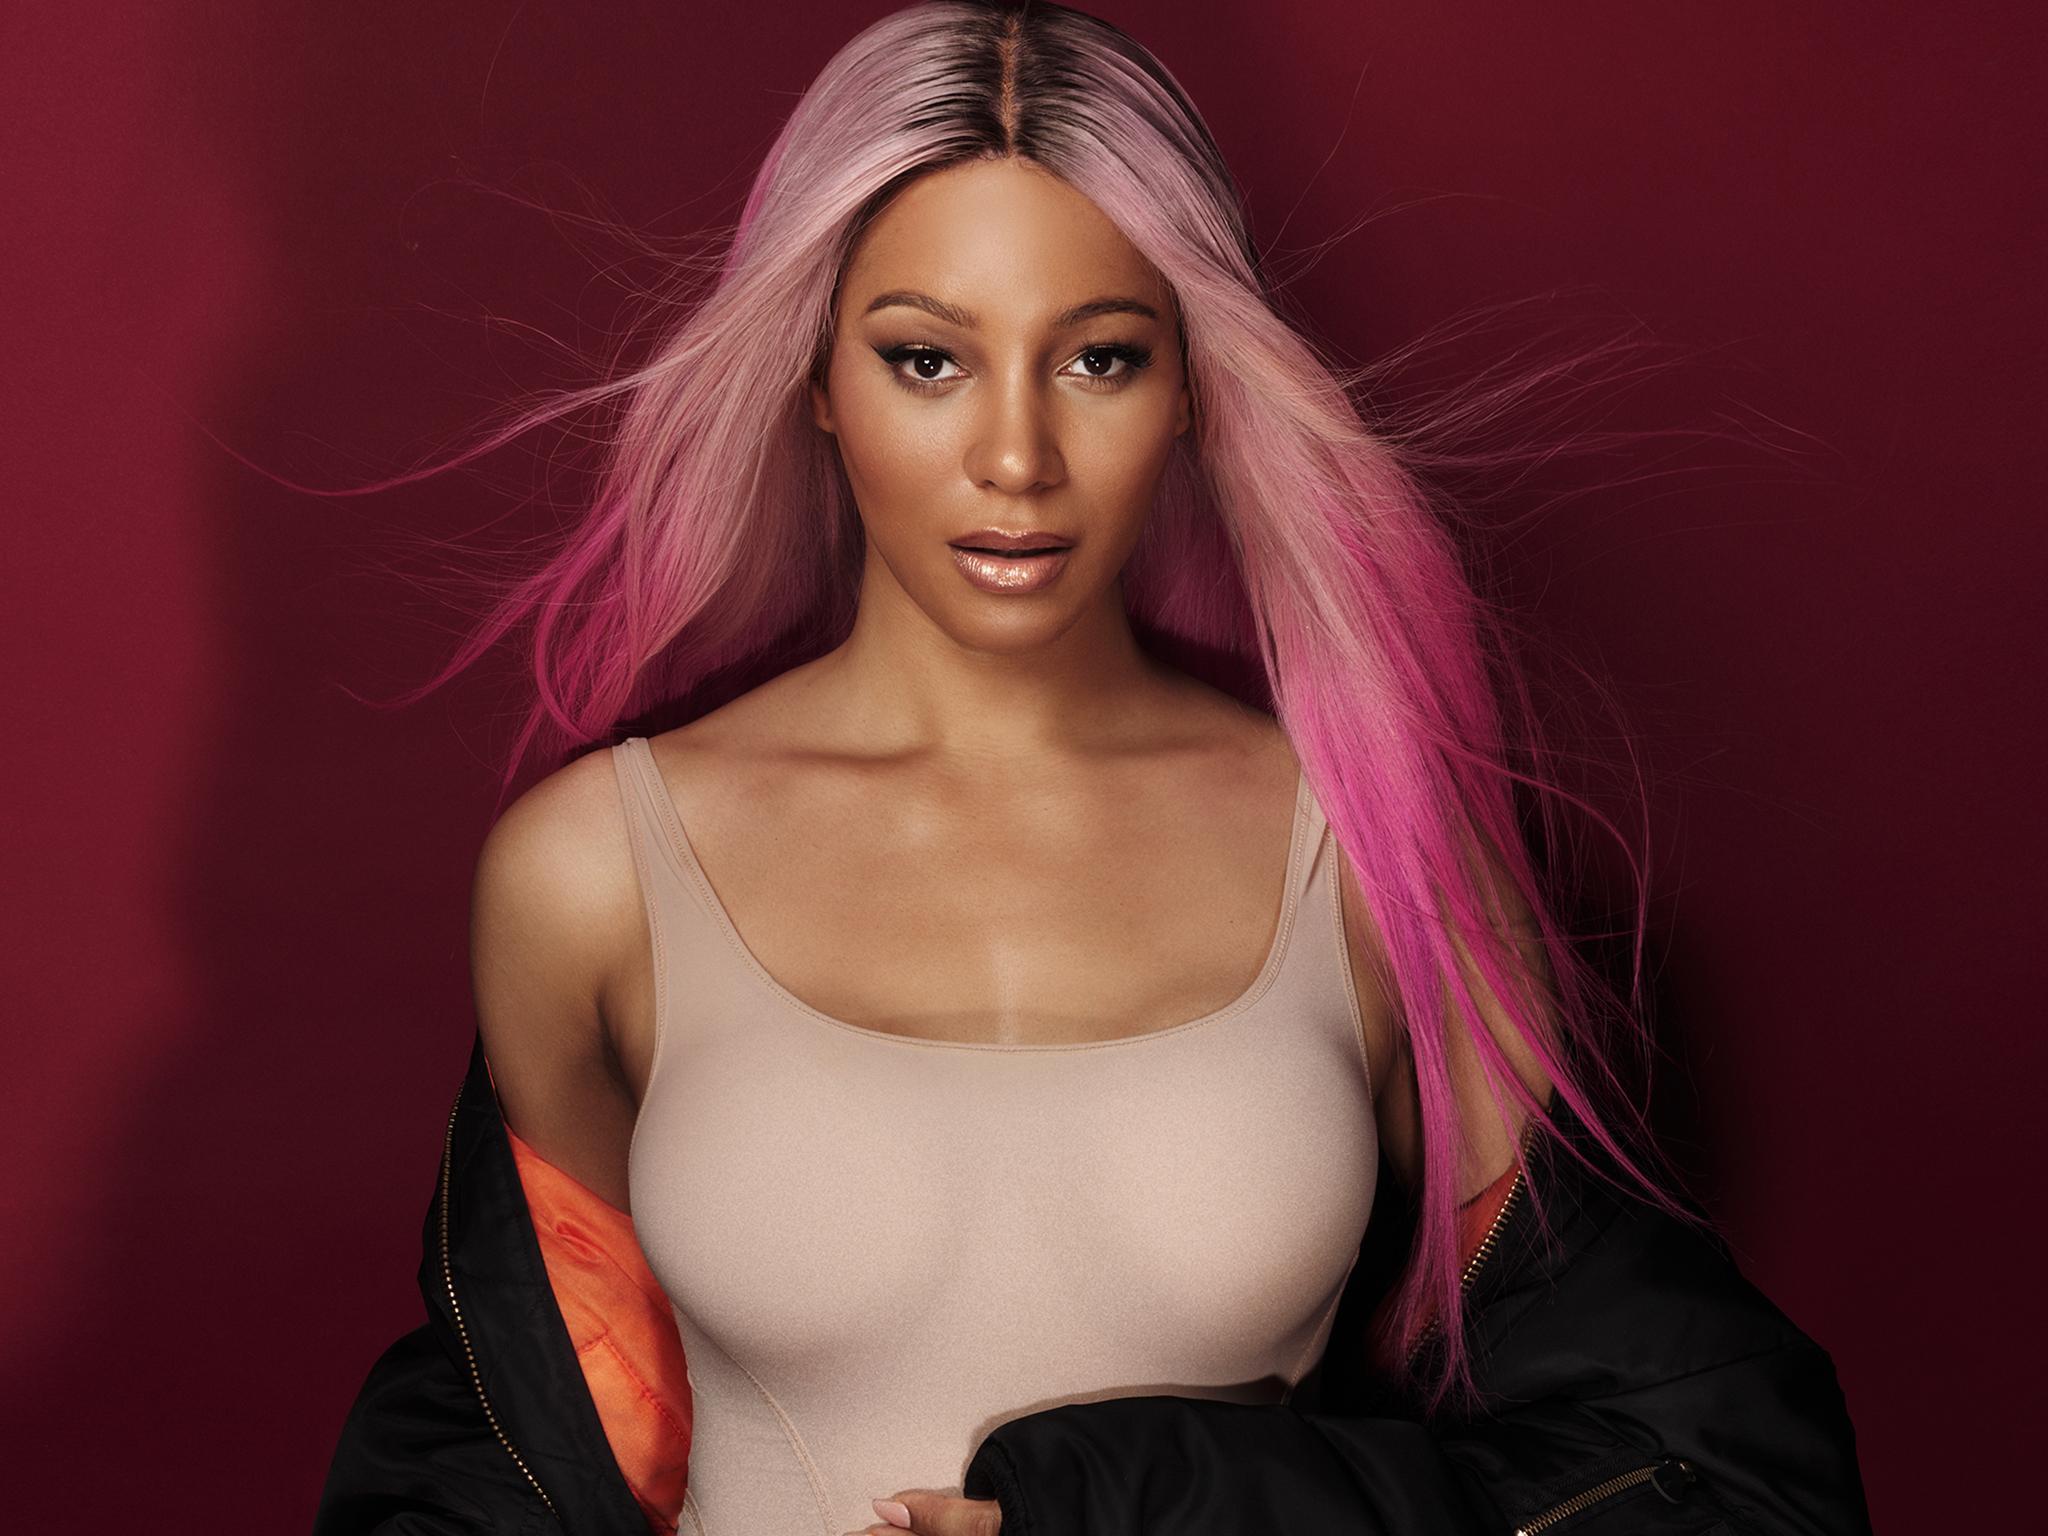 Munroe Bergdorf is a model and activist